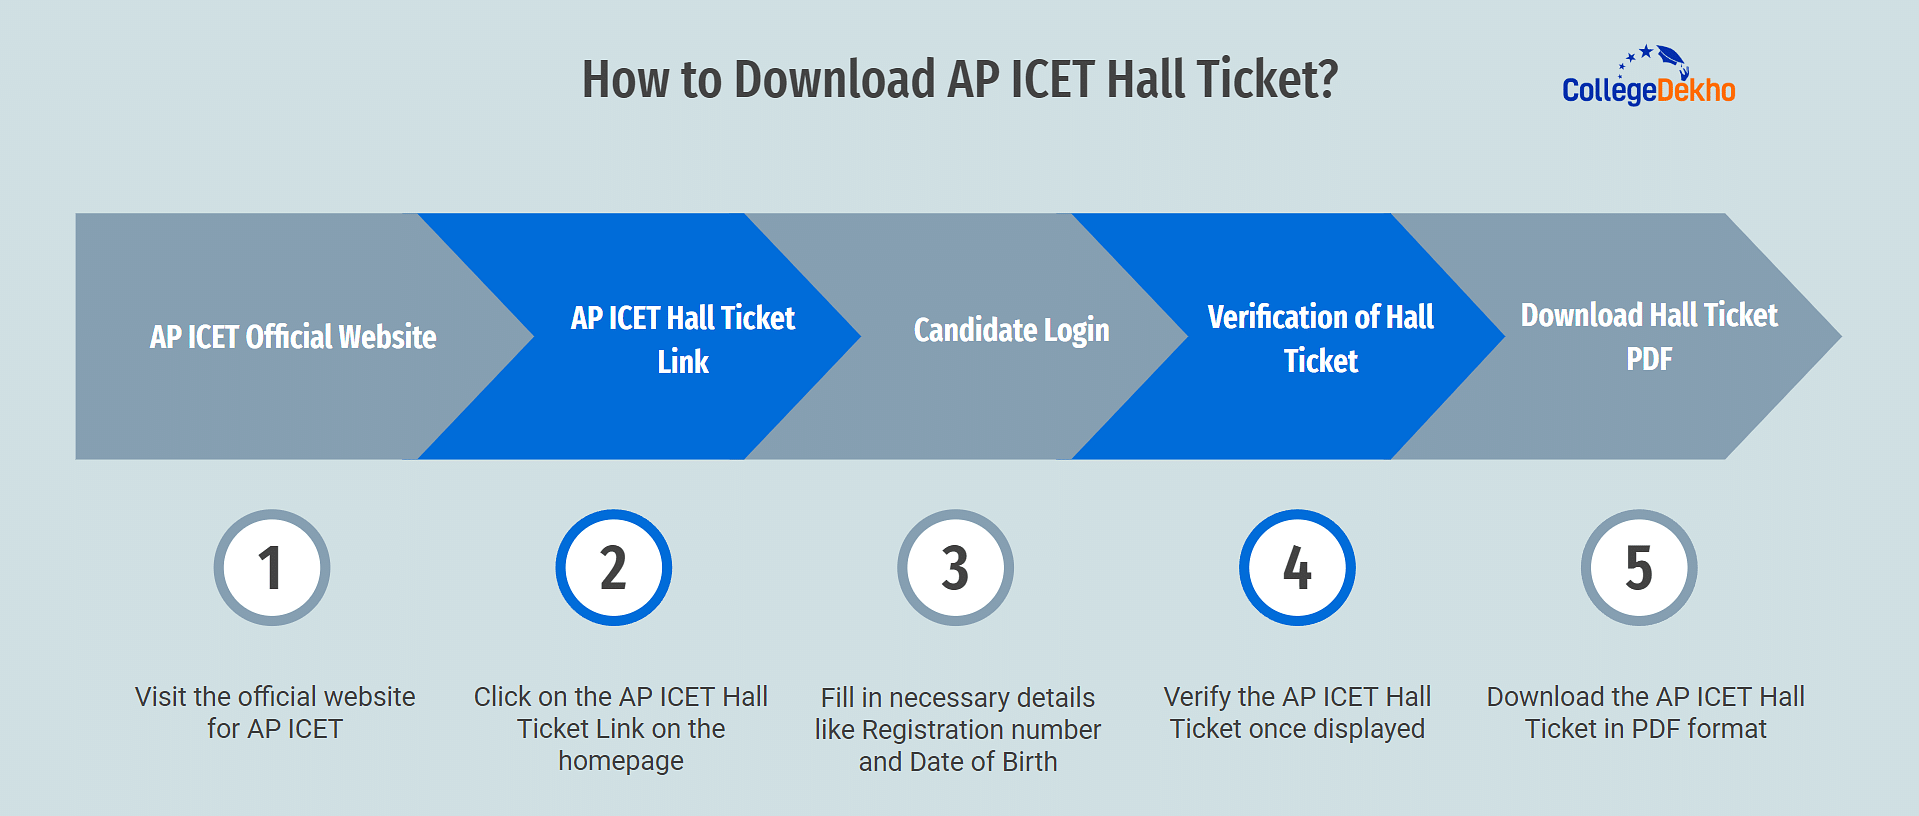 How to Download AP ICET Hall Ticket